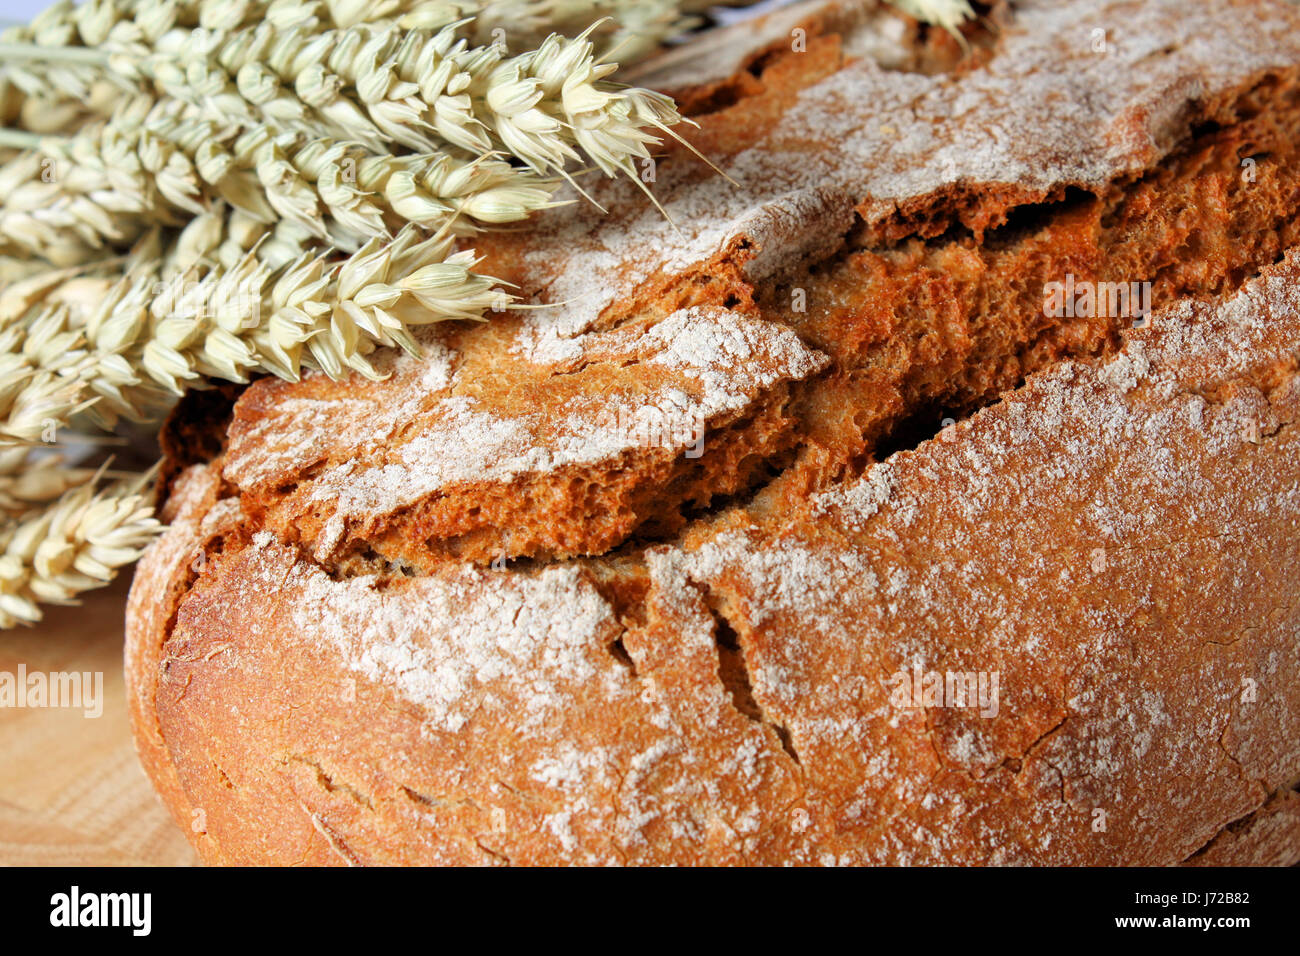 wheat and rye bread Stock Photo